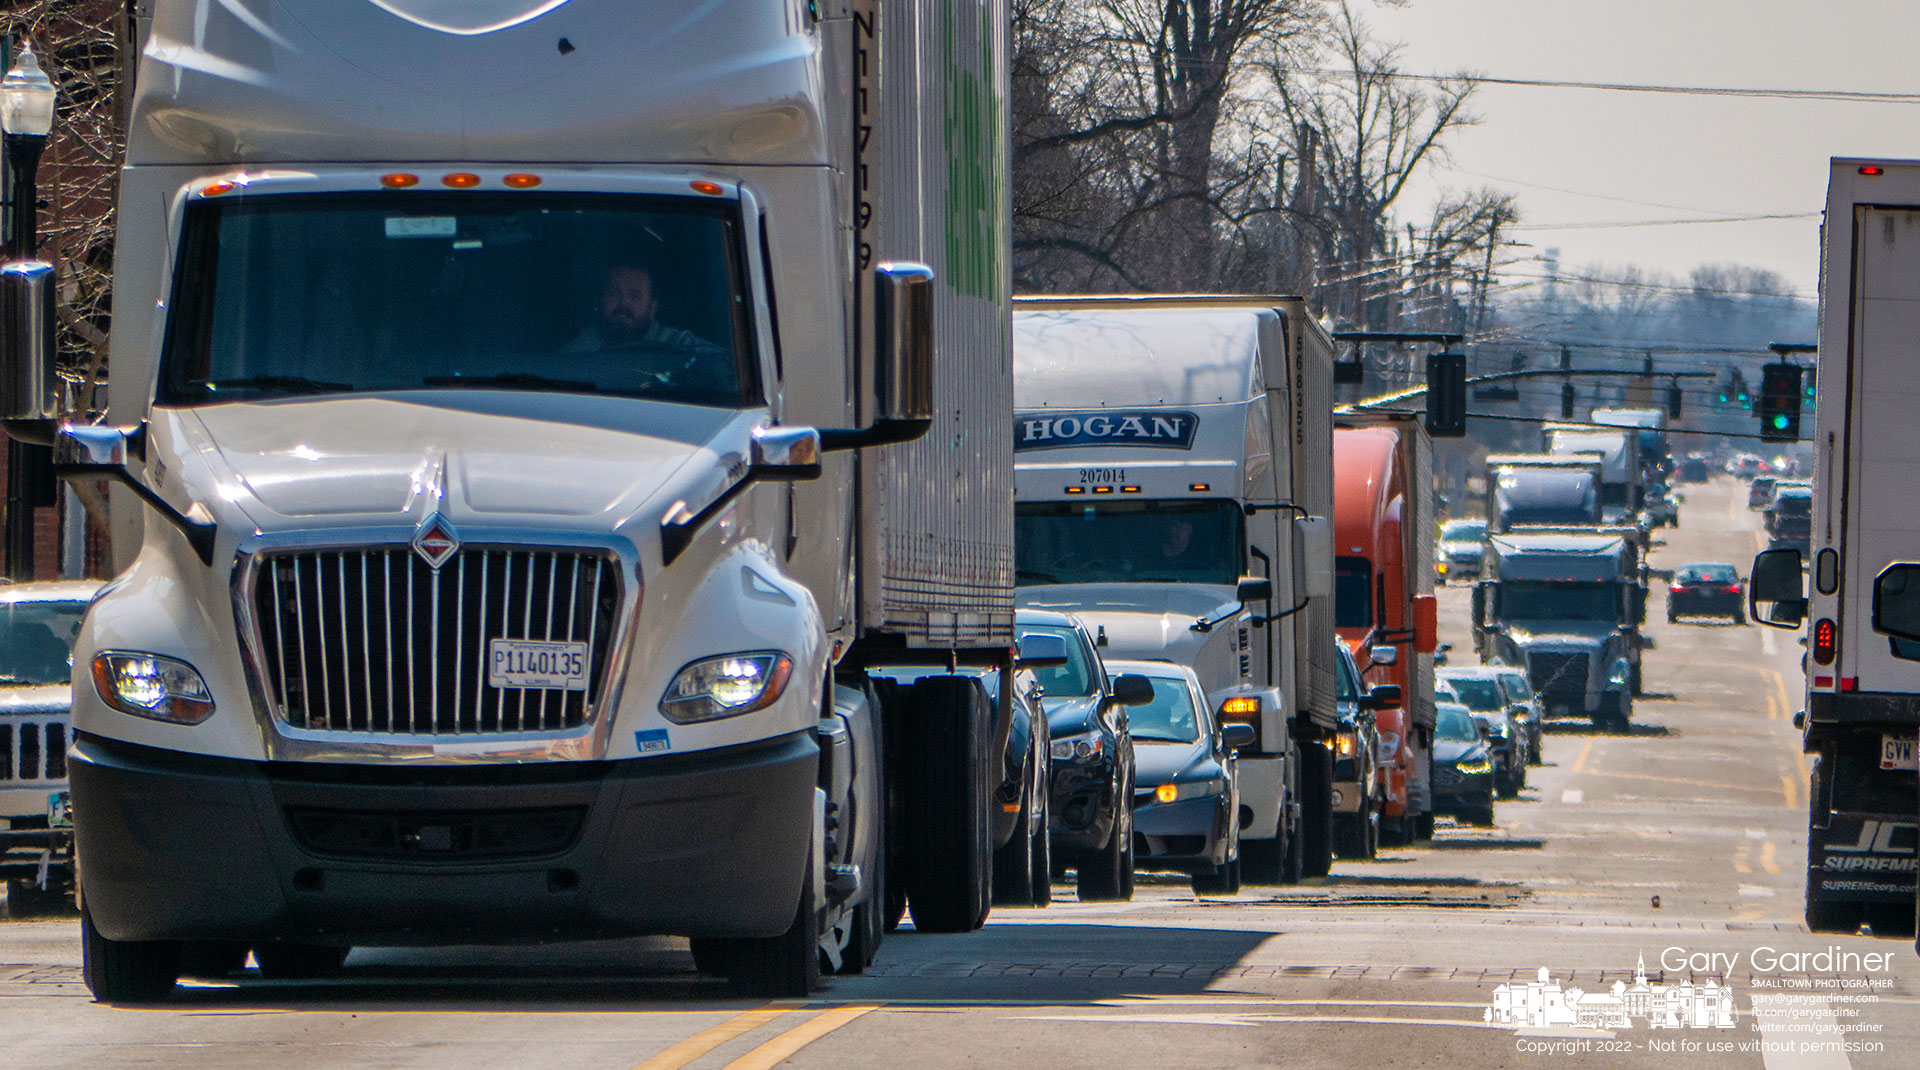 A line of long-haul trucks and semi-truck trailers snake their way on 3C Highway through Uptown Westerville after being diverted from I-71 after it was closed following a shooting. My Final Photo for March 11, 2022.